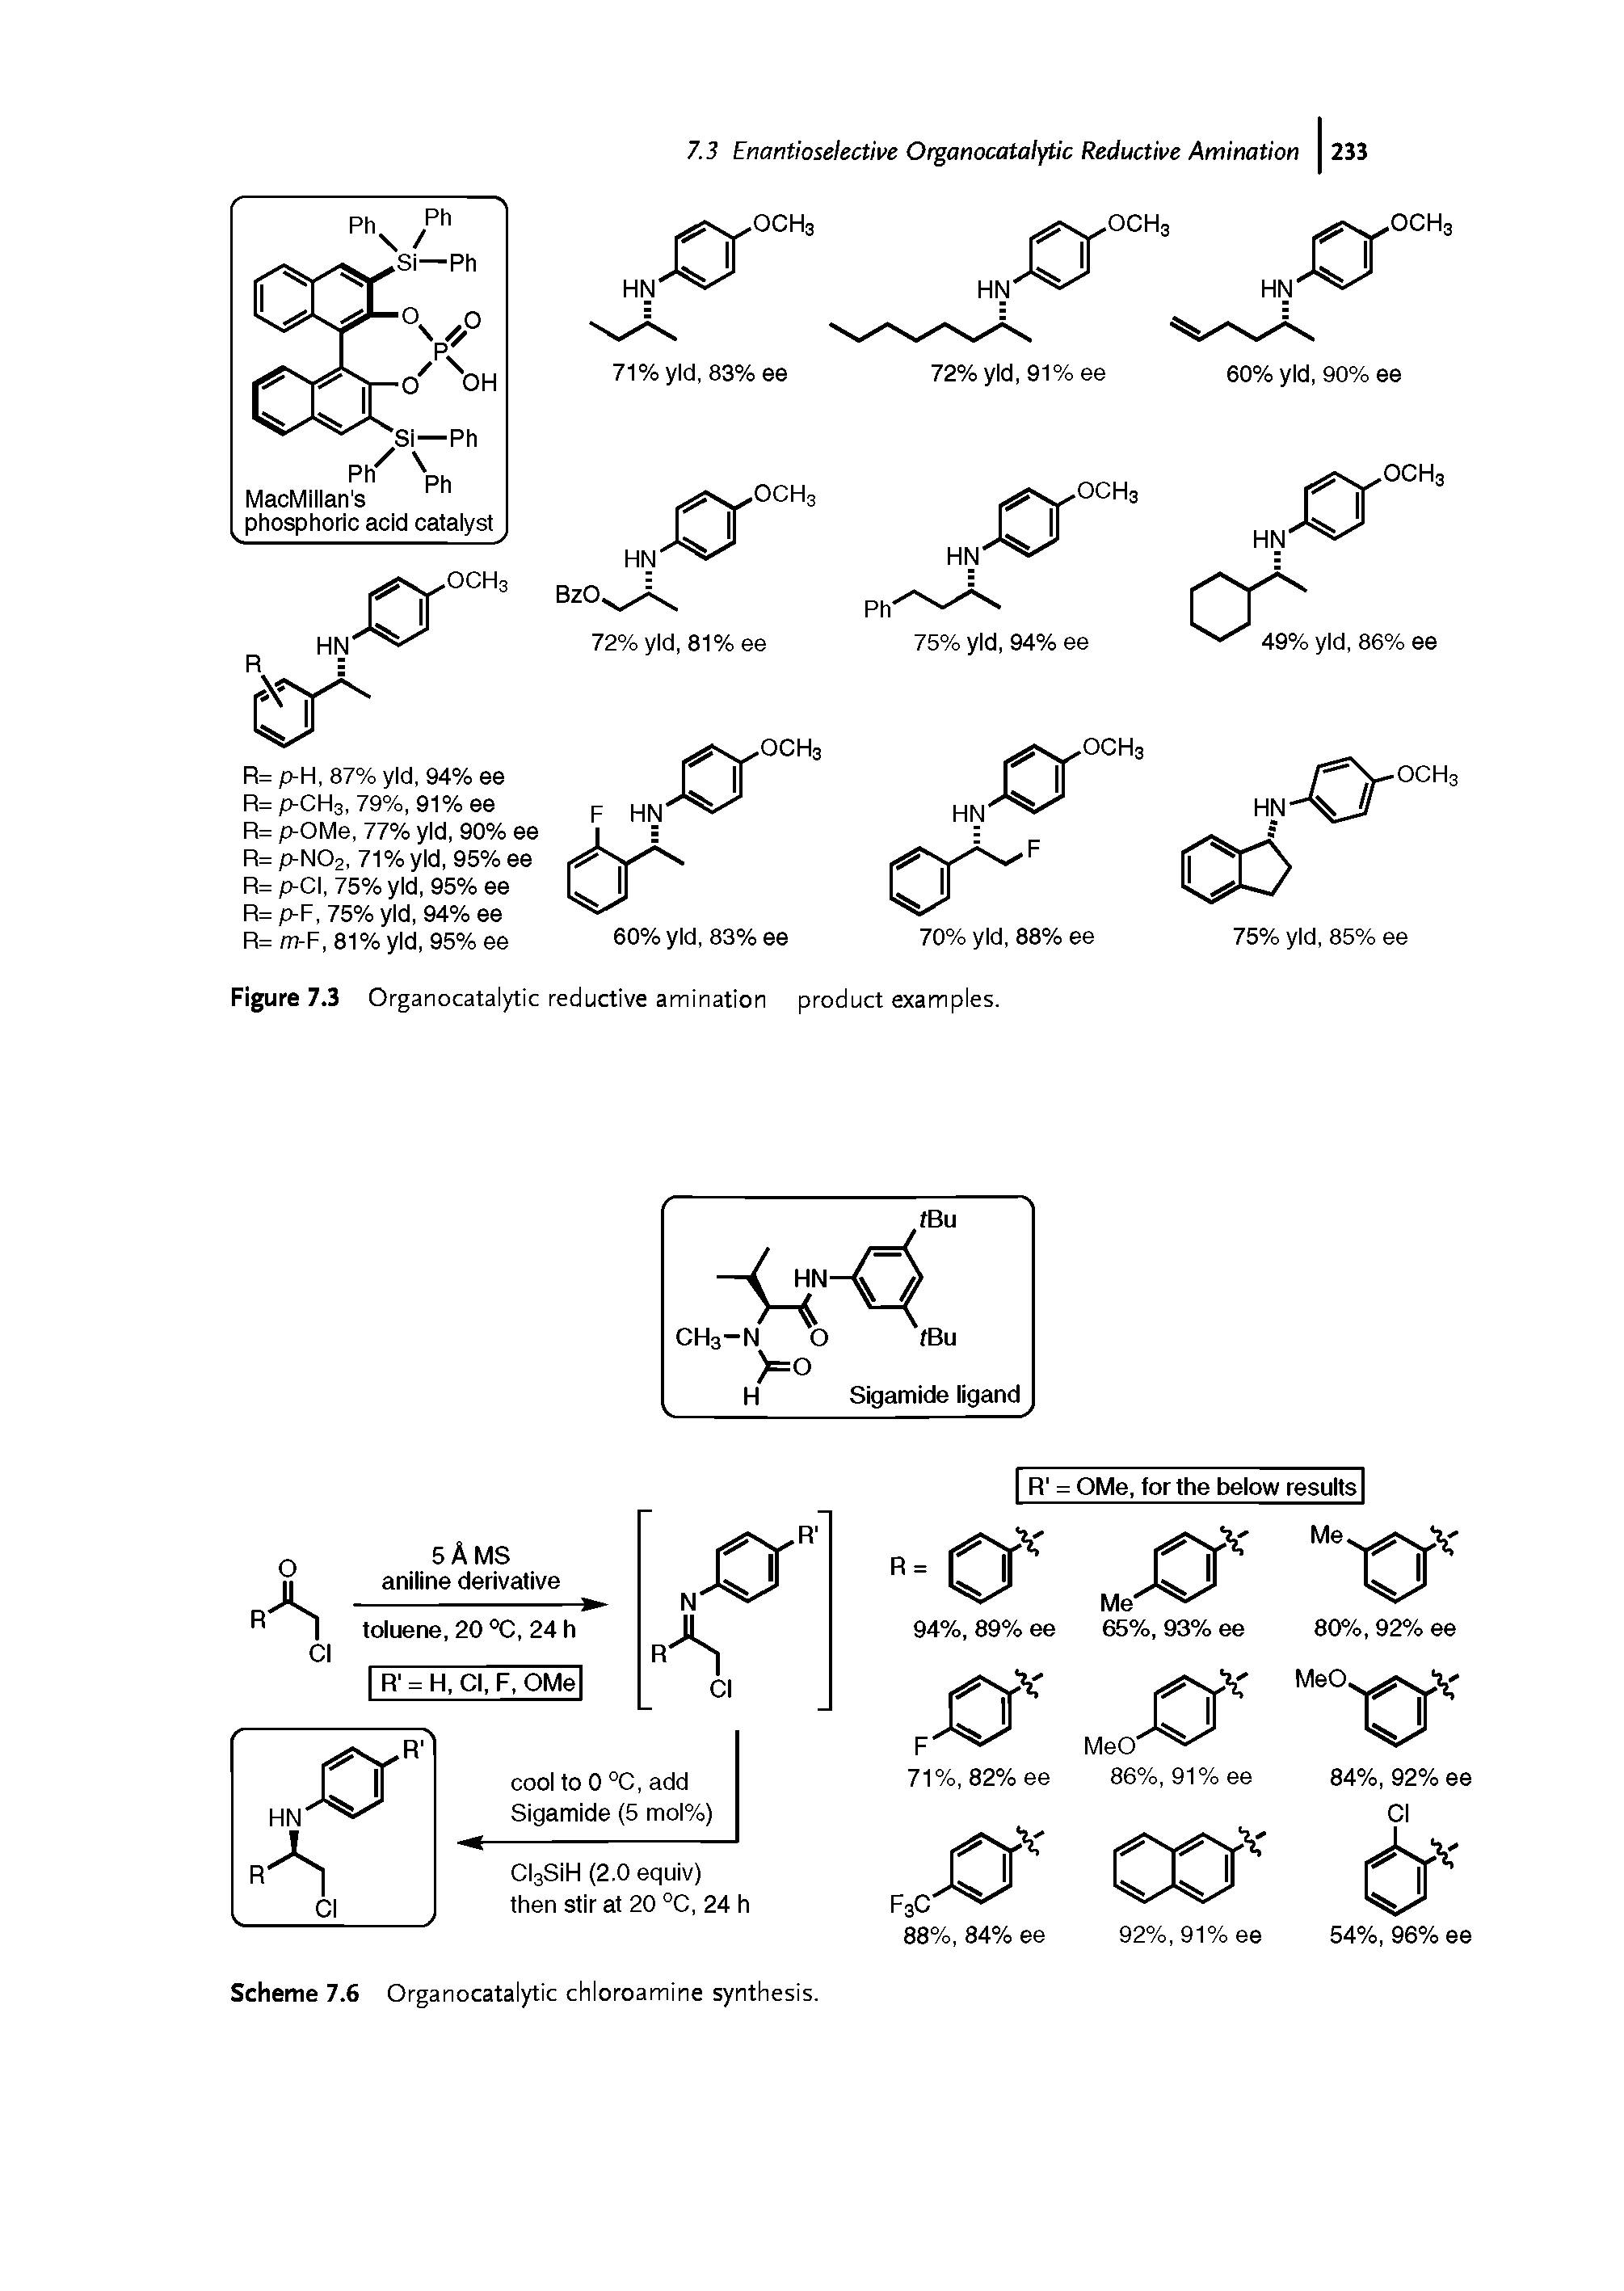 Figure 7.3 Organocatalytic reductive amination product examples.